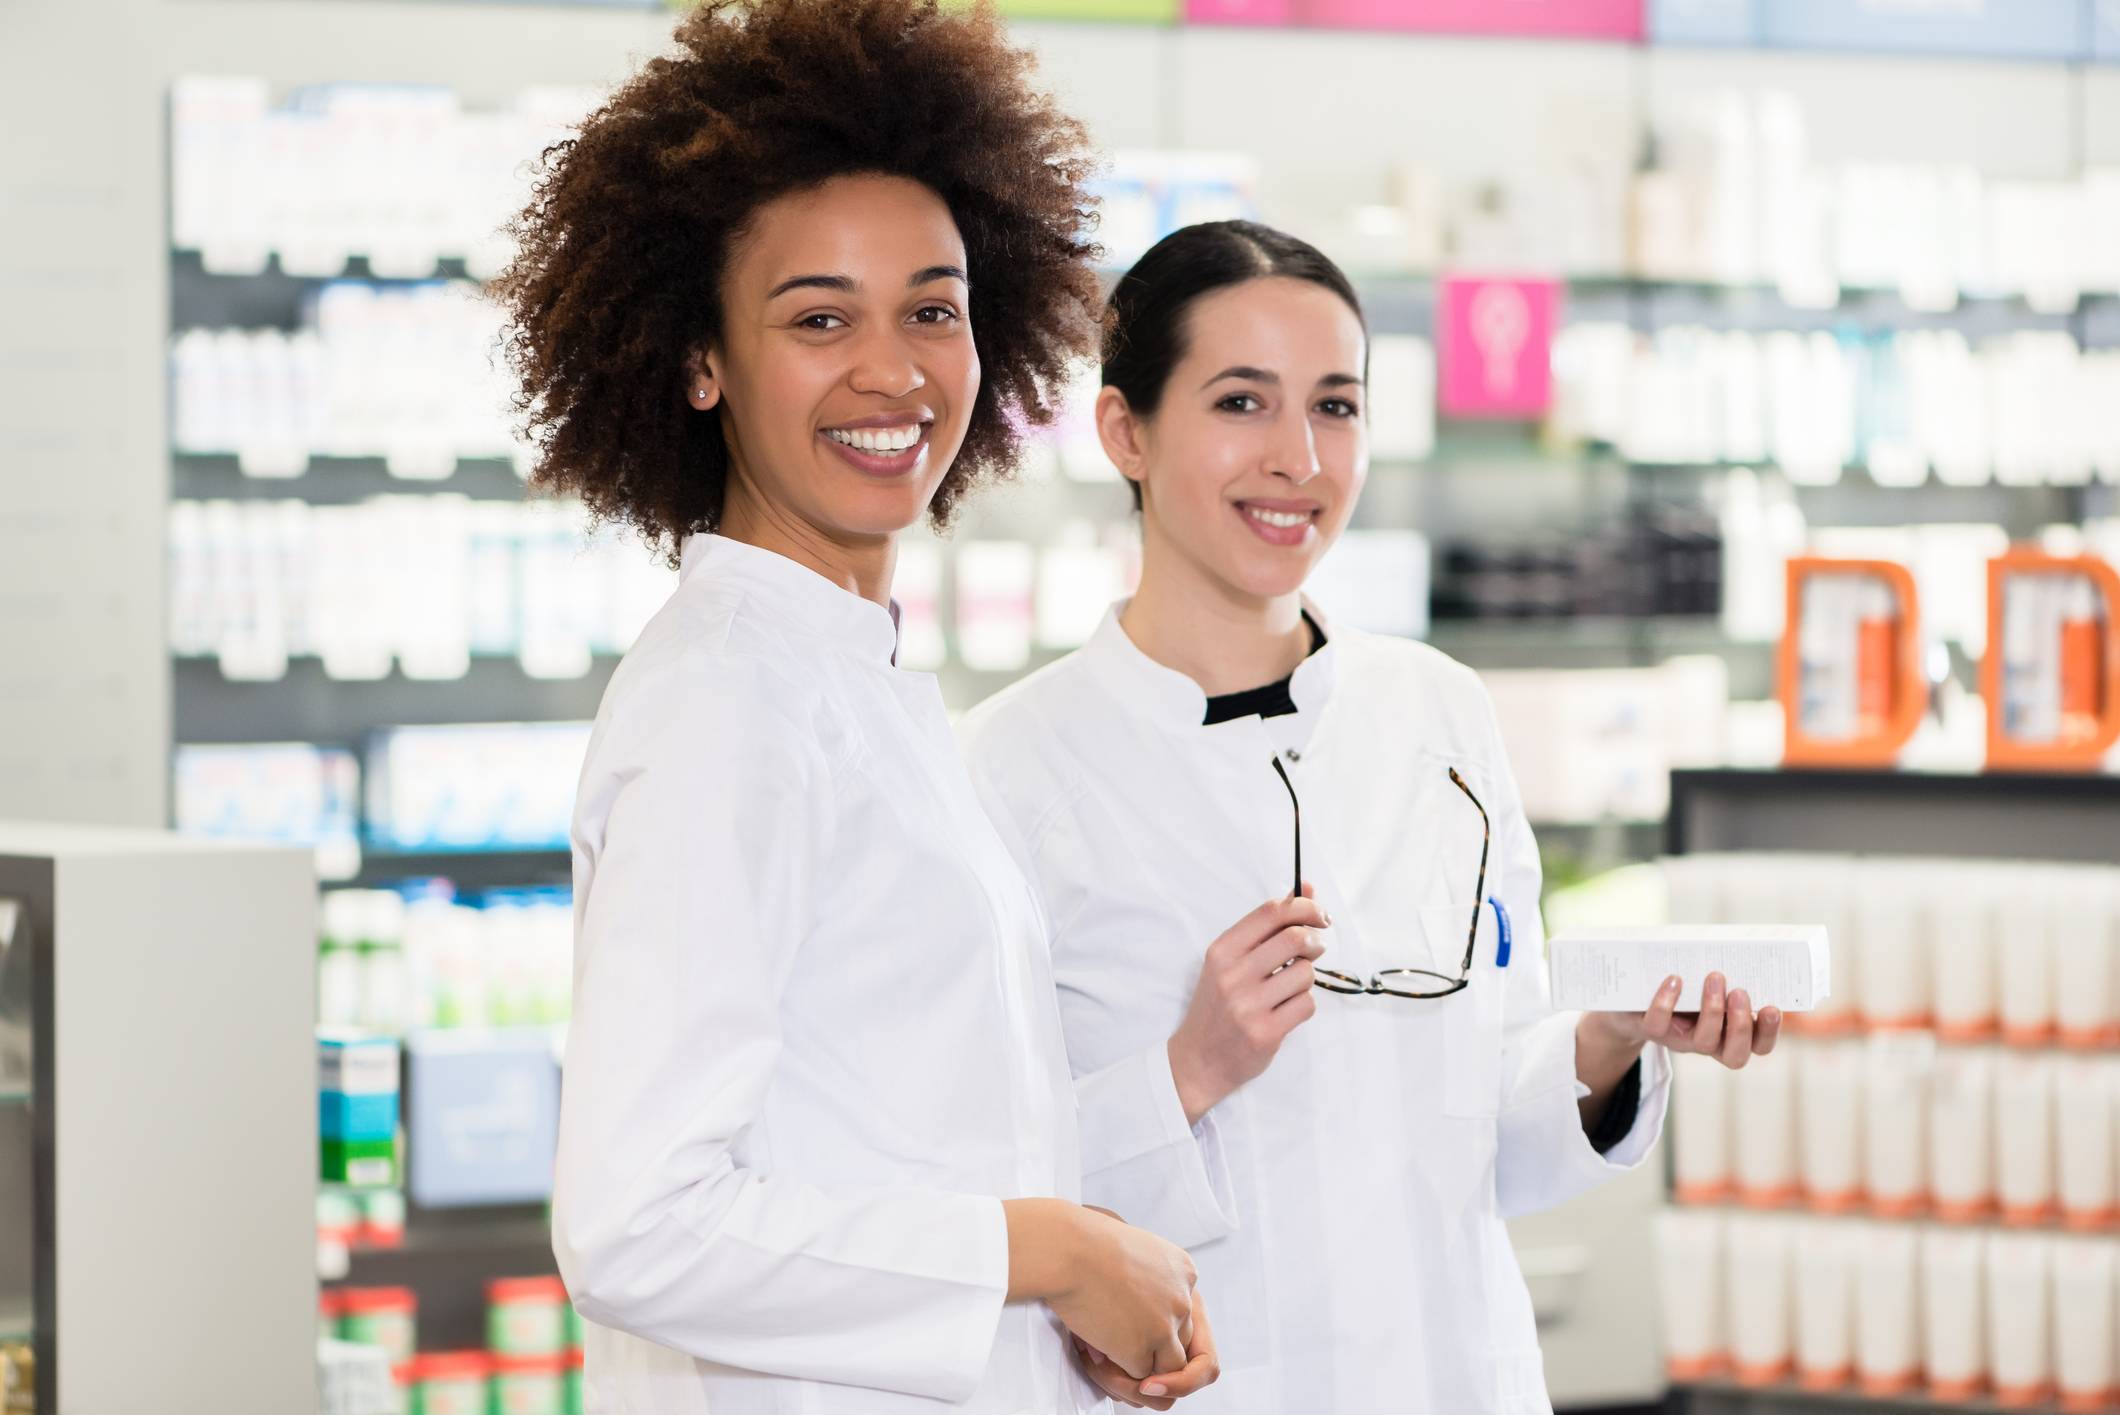 Portrait of a African-American pharmacist next to her colleague